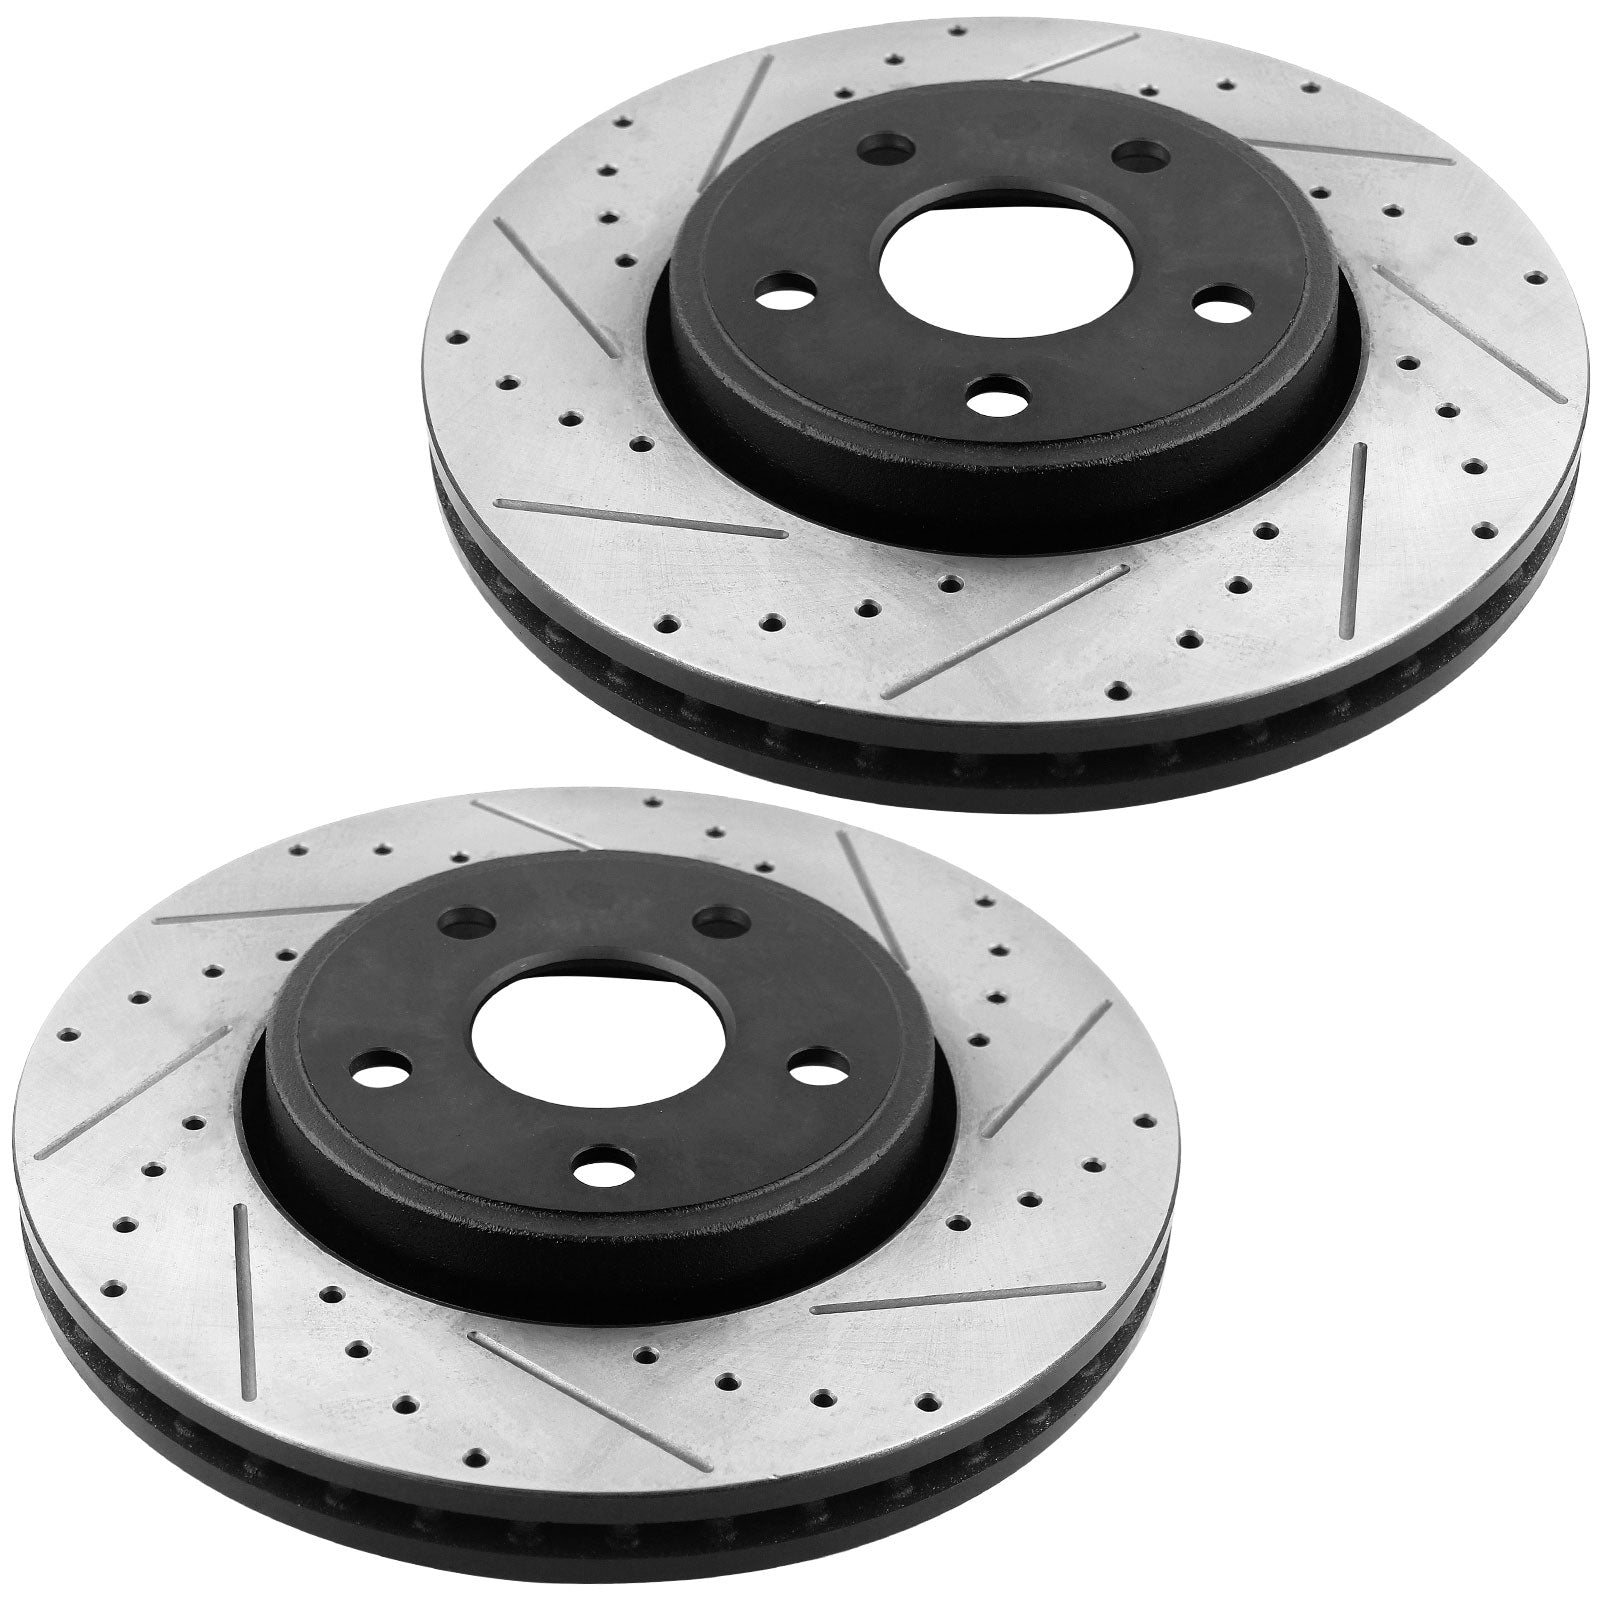 MotorbyMotor Front Brake Rotors 330mm Drilled & Slotted Design Brake Rotor & Brake Pad kit Fits for Dodge Durango Jeep Grand Cherokee 2011 - 2017-Front Rotors and Solid Rear Rotors ONLY MotorbyMotor